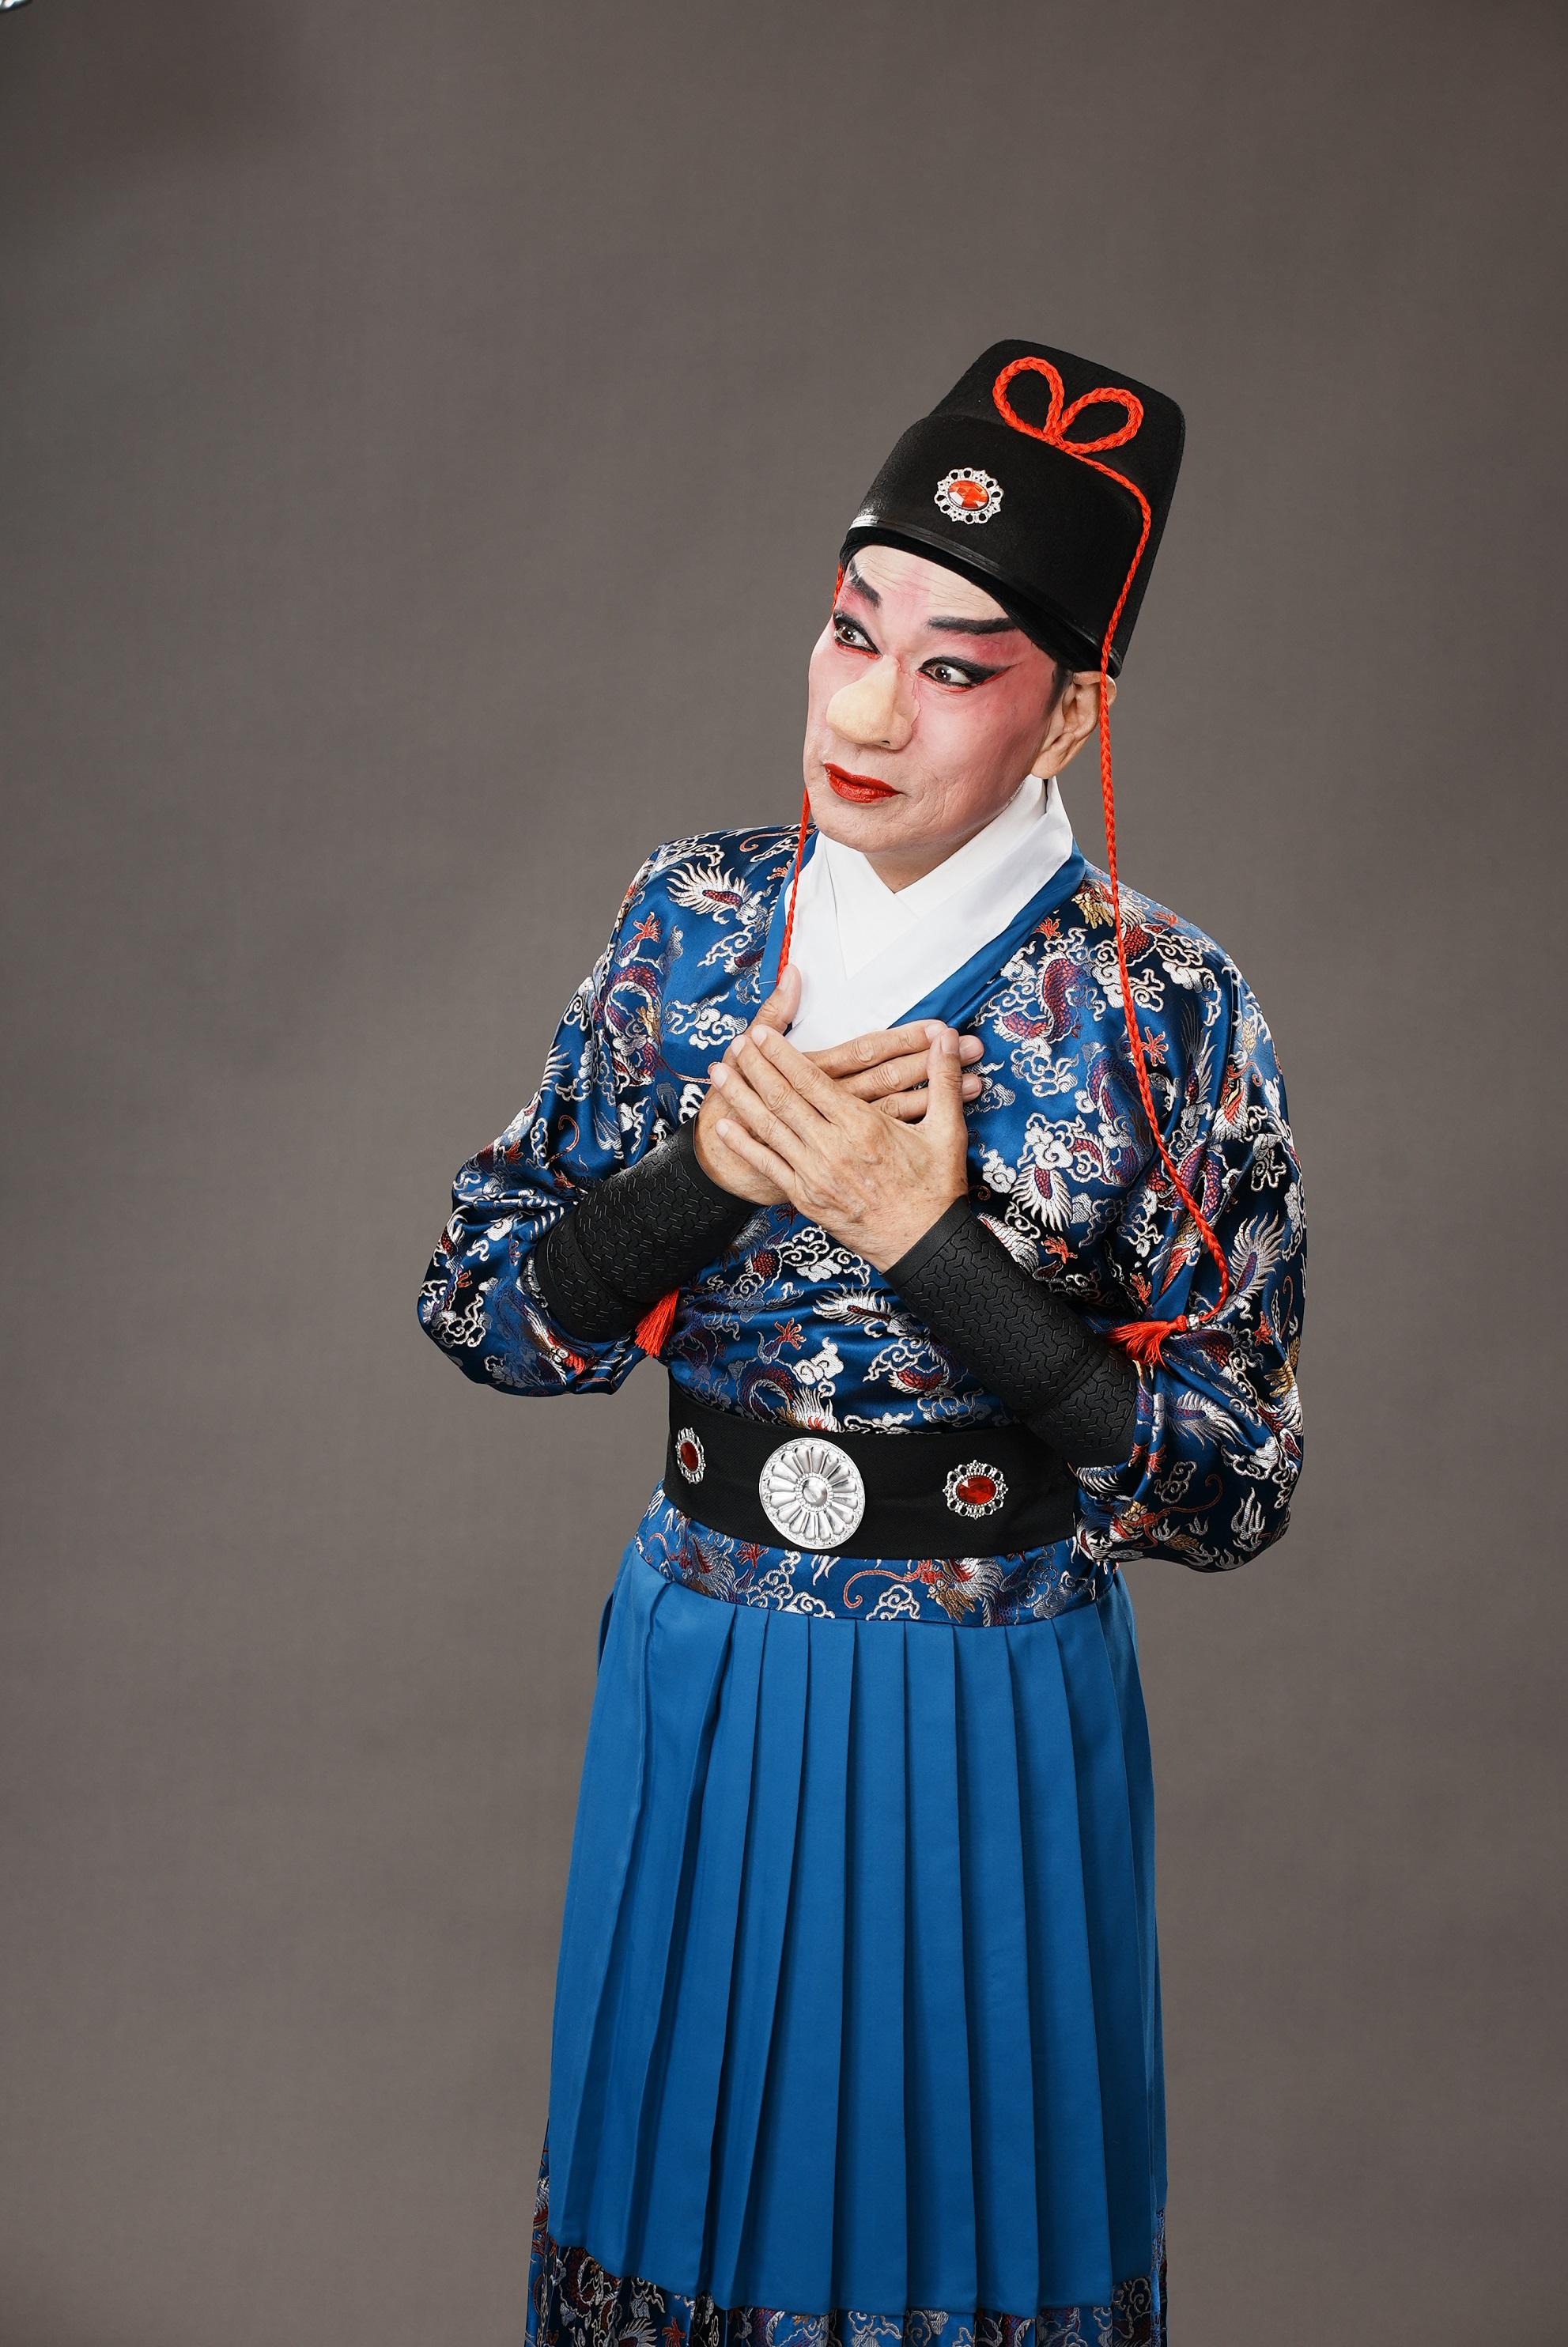 The Leisure and Cultural Services Department will present eight quality programmes at this year's Chinese Opera Festival from June to August. Photo shows famous Cantonese opera artist Law Ka-ying, who will perform in the "Cyrano de Bergerac" - A Cantonese Opera Interpretation.